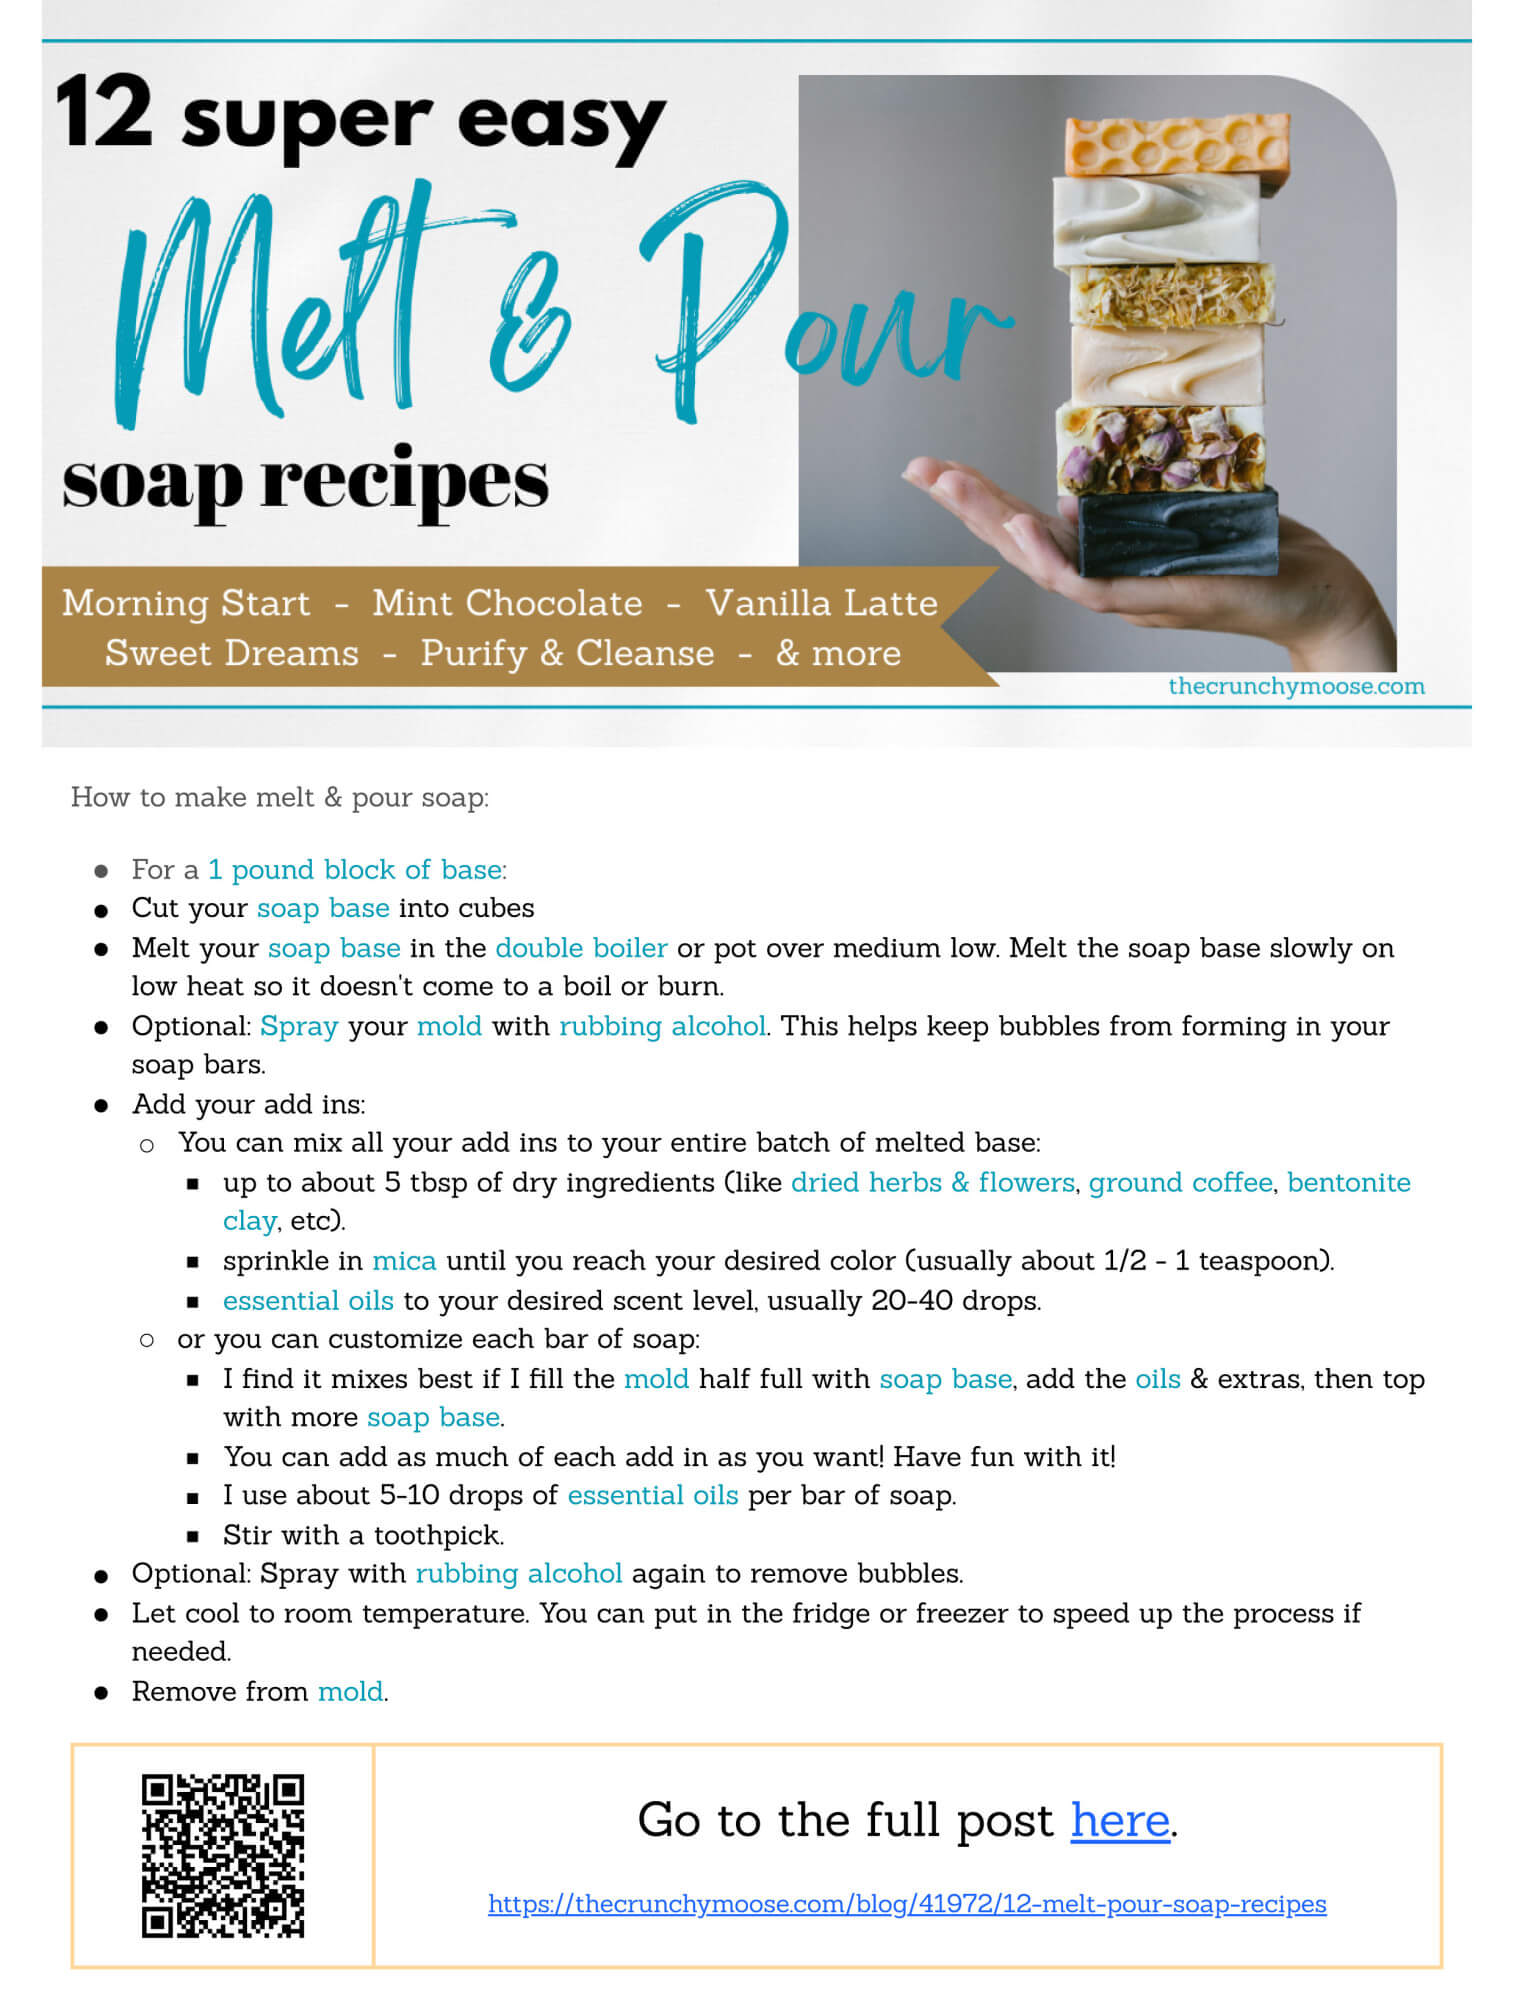 printable recipe cards for melt and pour soap